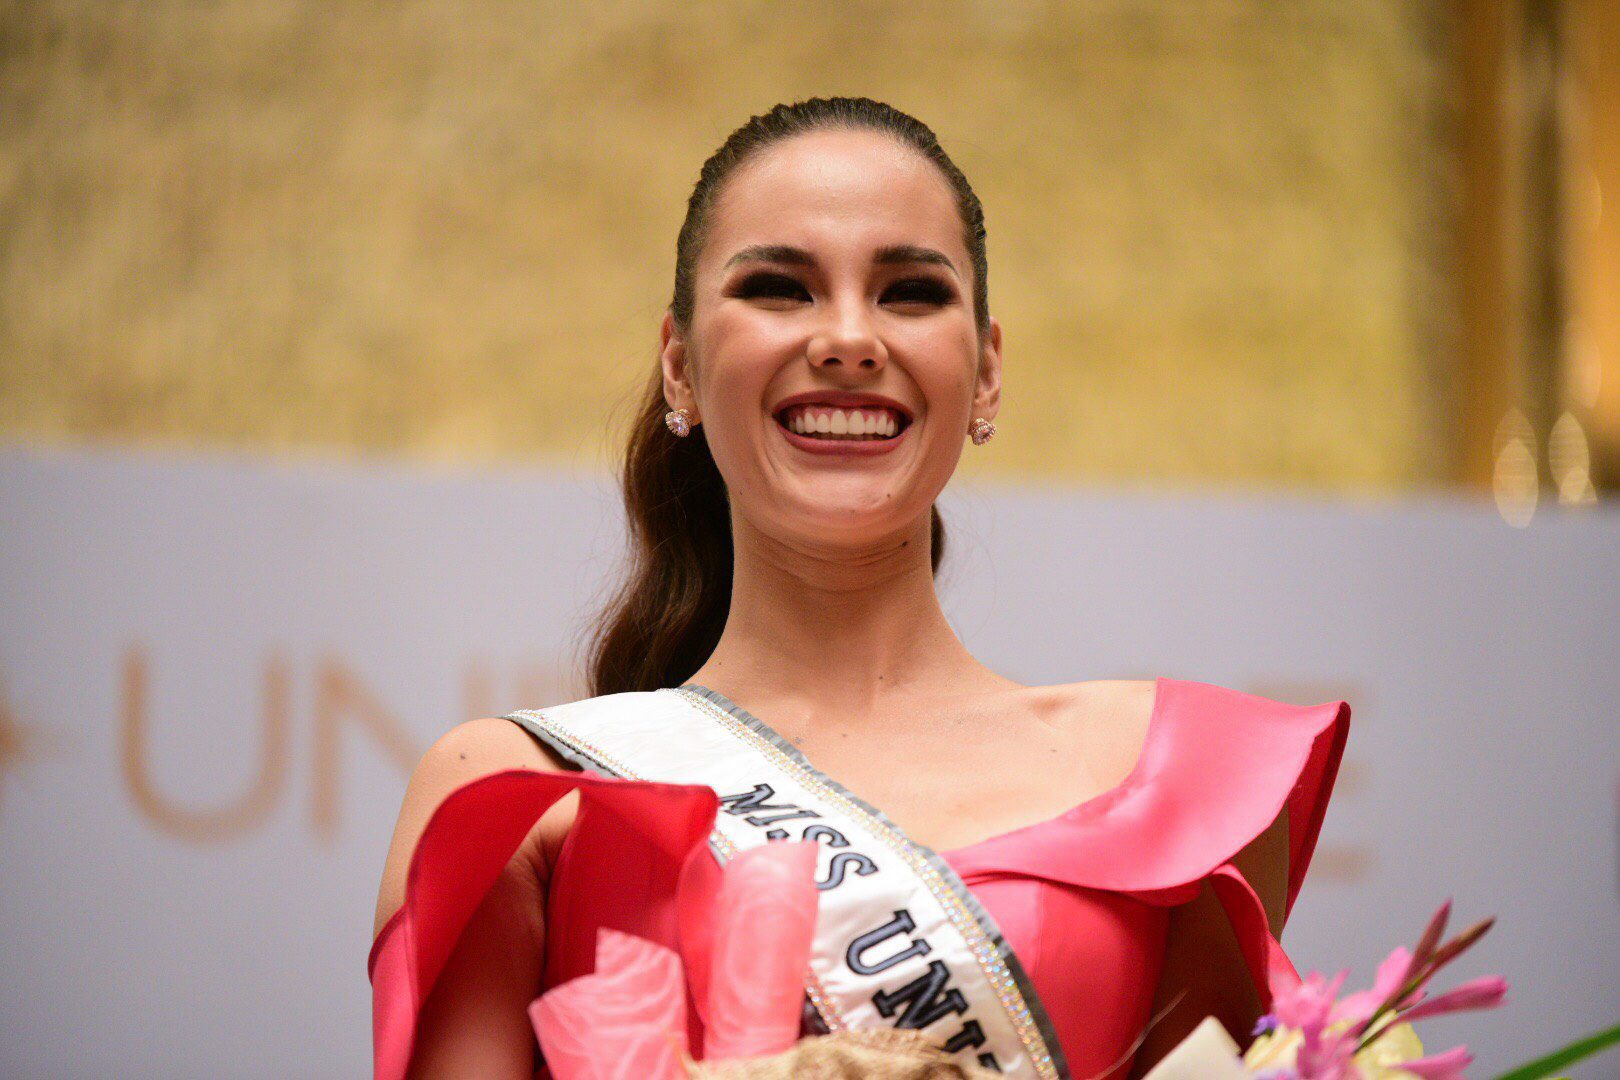 Catriona Gray on saying goodbye to 2018: My heart is full